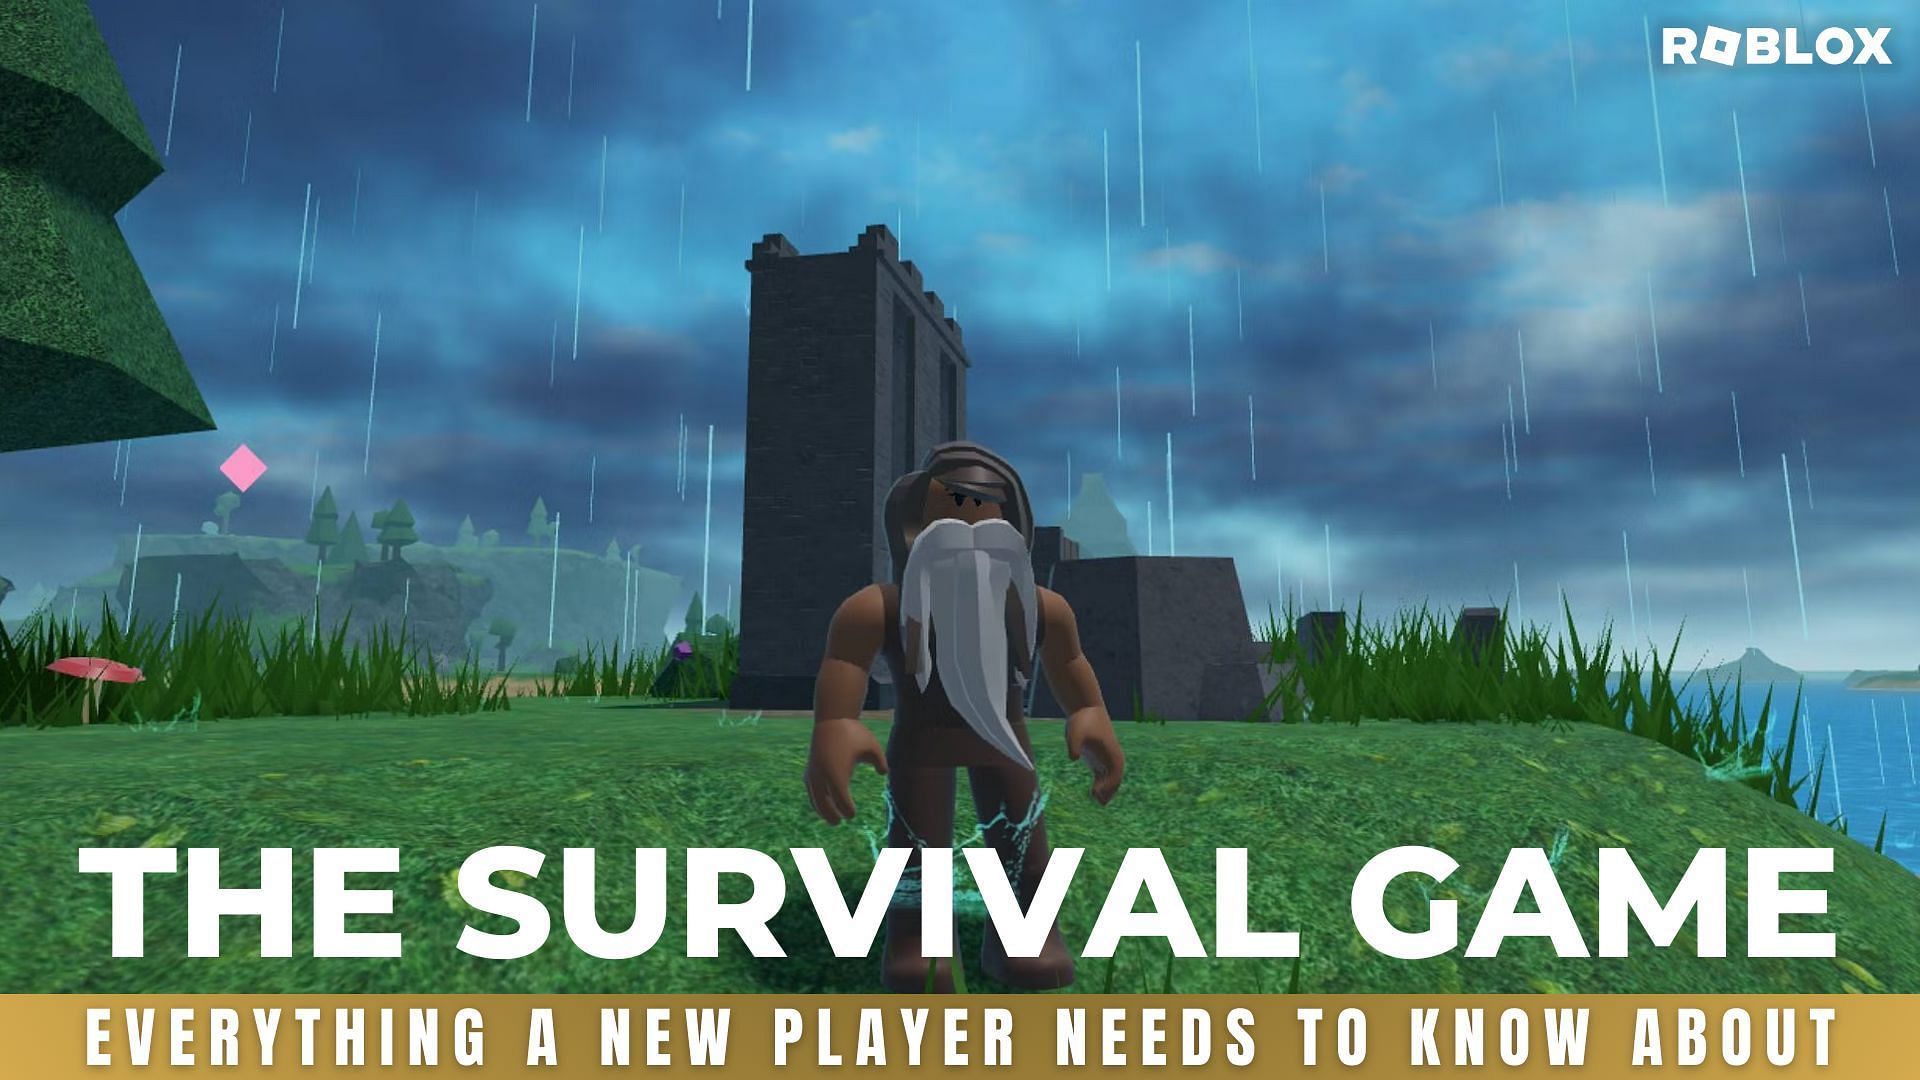 Survival of the fittest in The Survival Game. (Image via Sportskeeda)